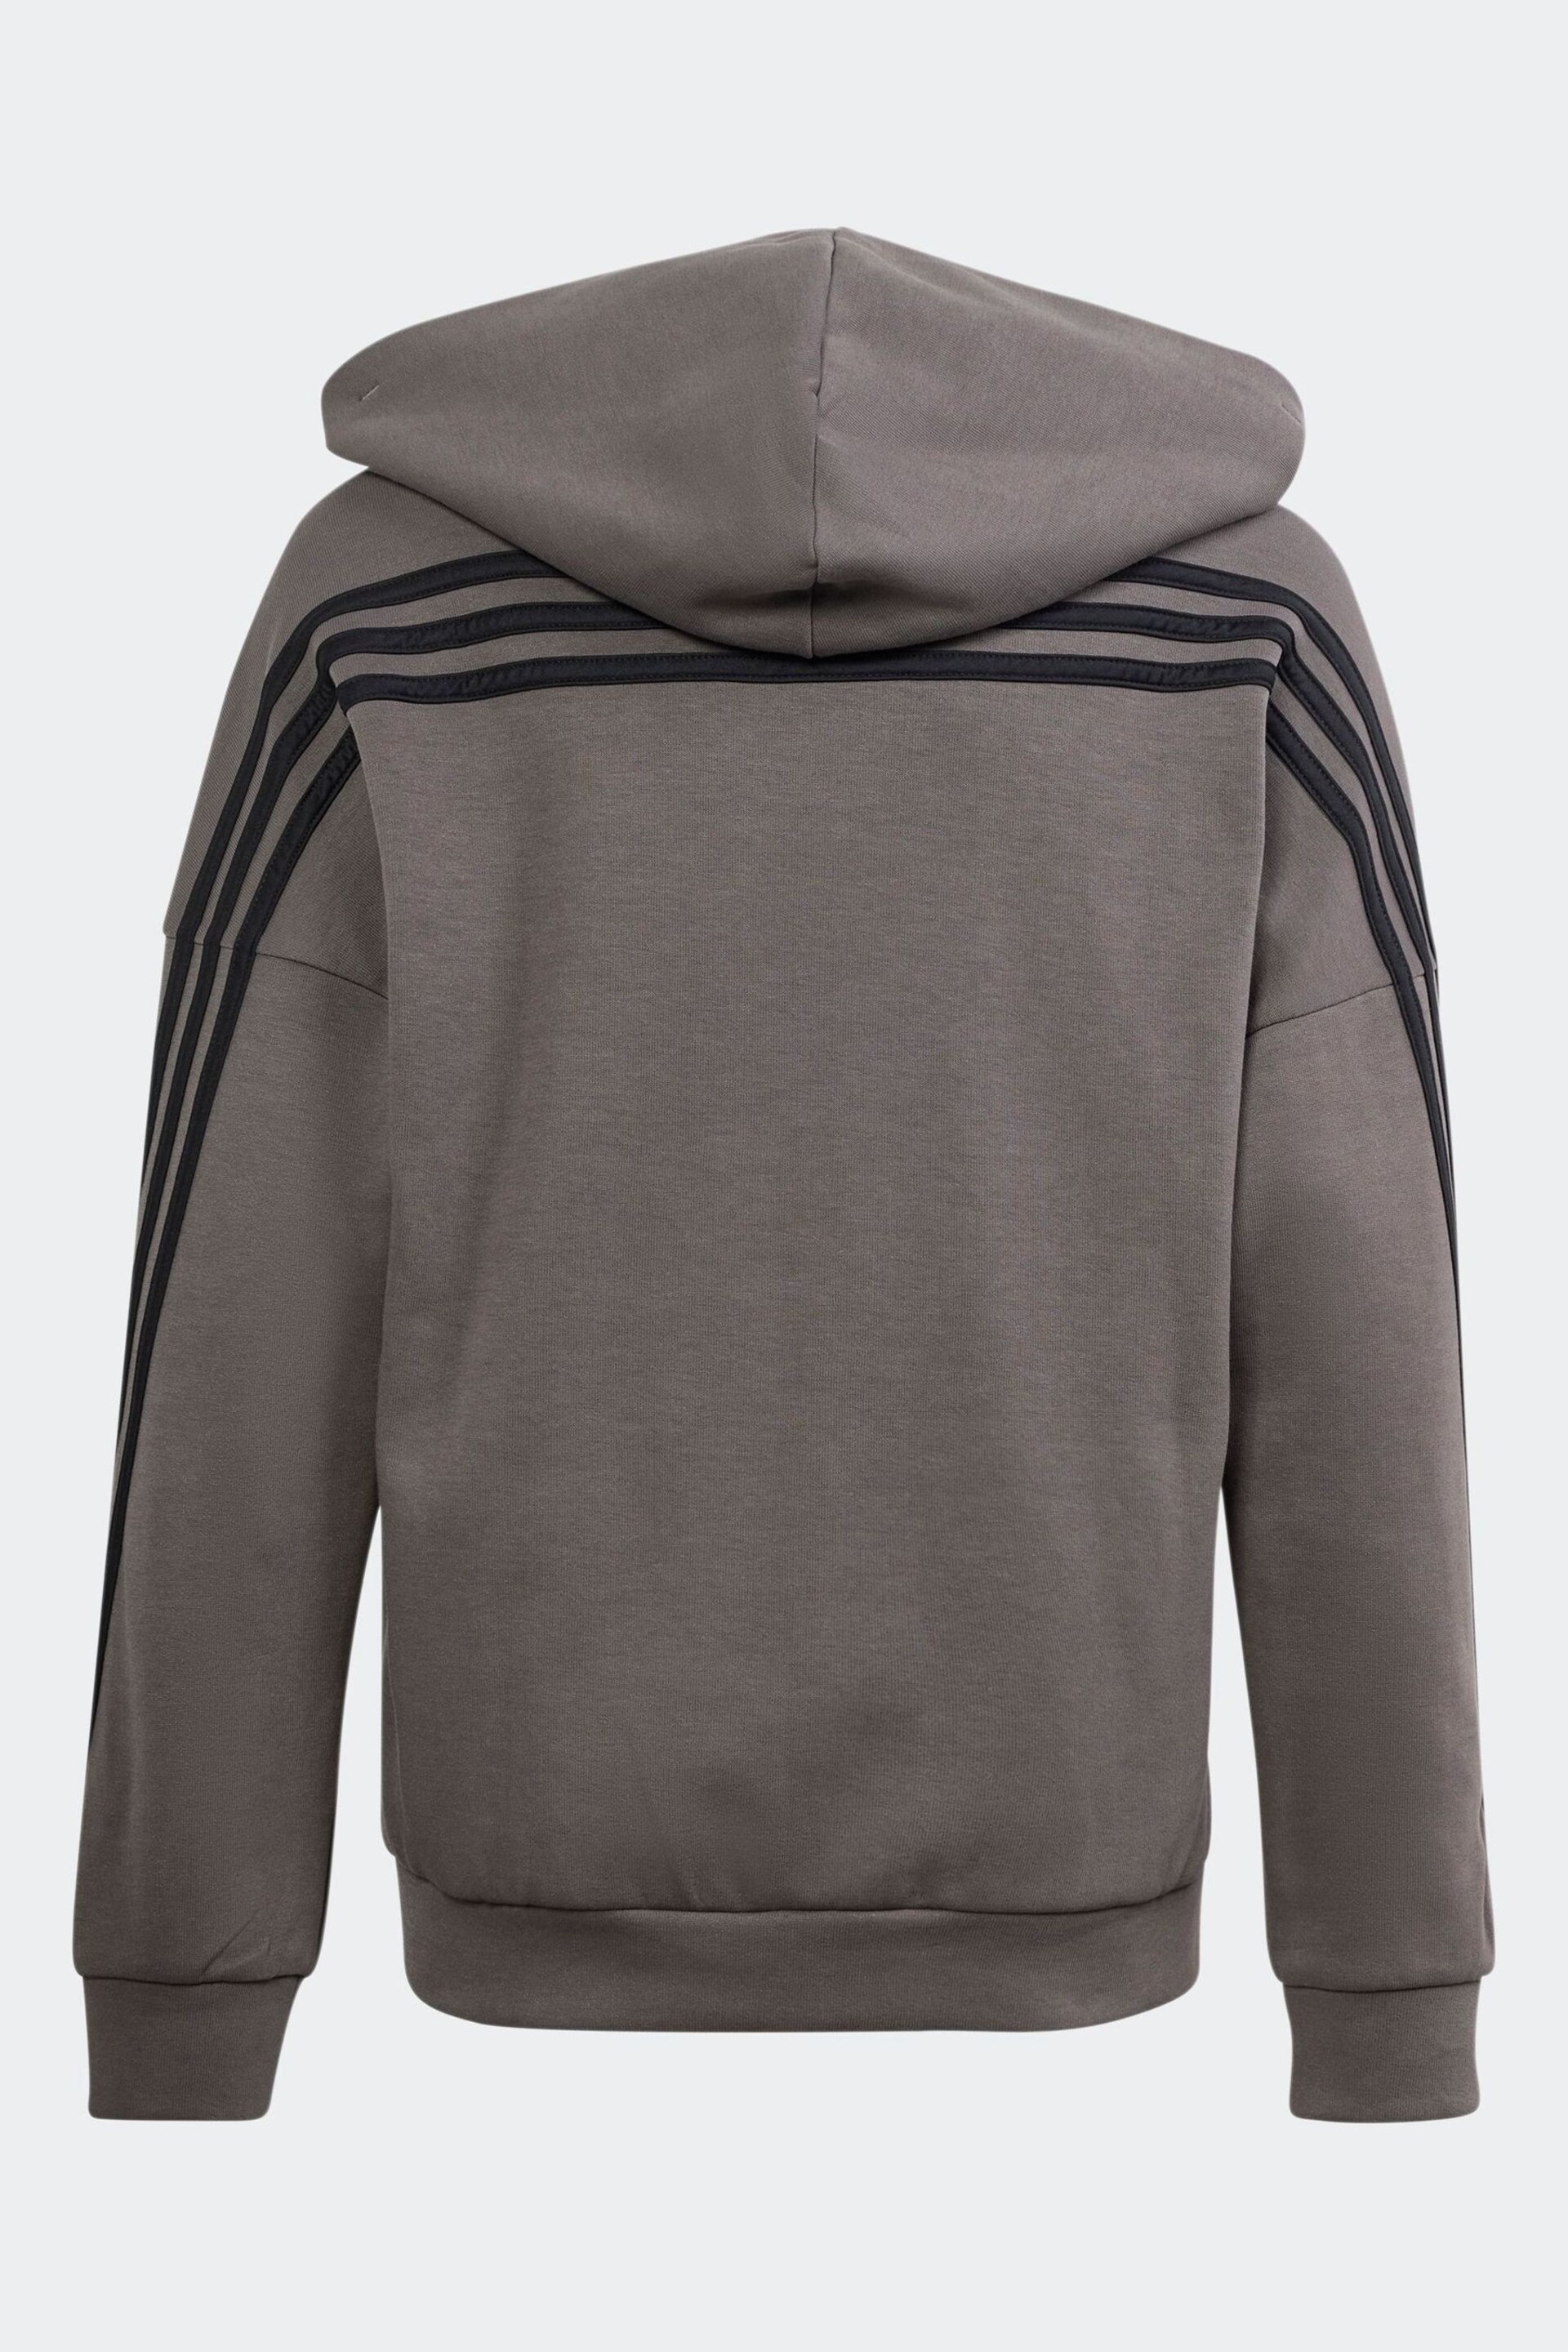 adidas Charcoal Grey Sportswear Future Icons 3-Stripes Full-Zip Hooded Track Top - Image 2 of 5